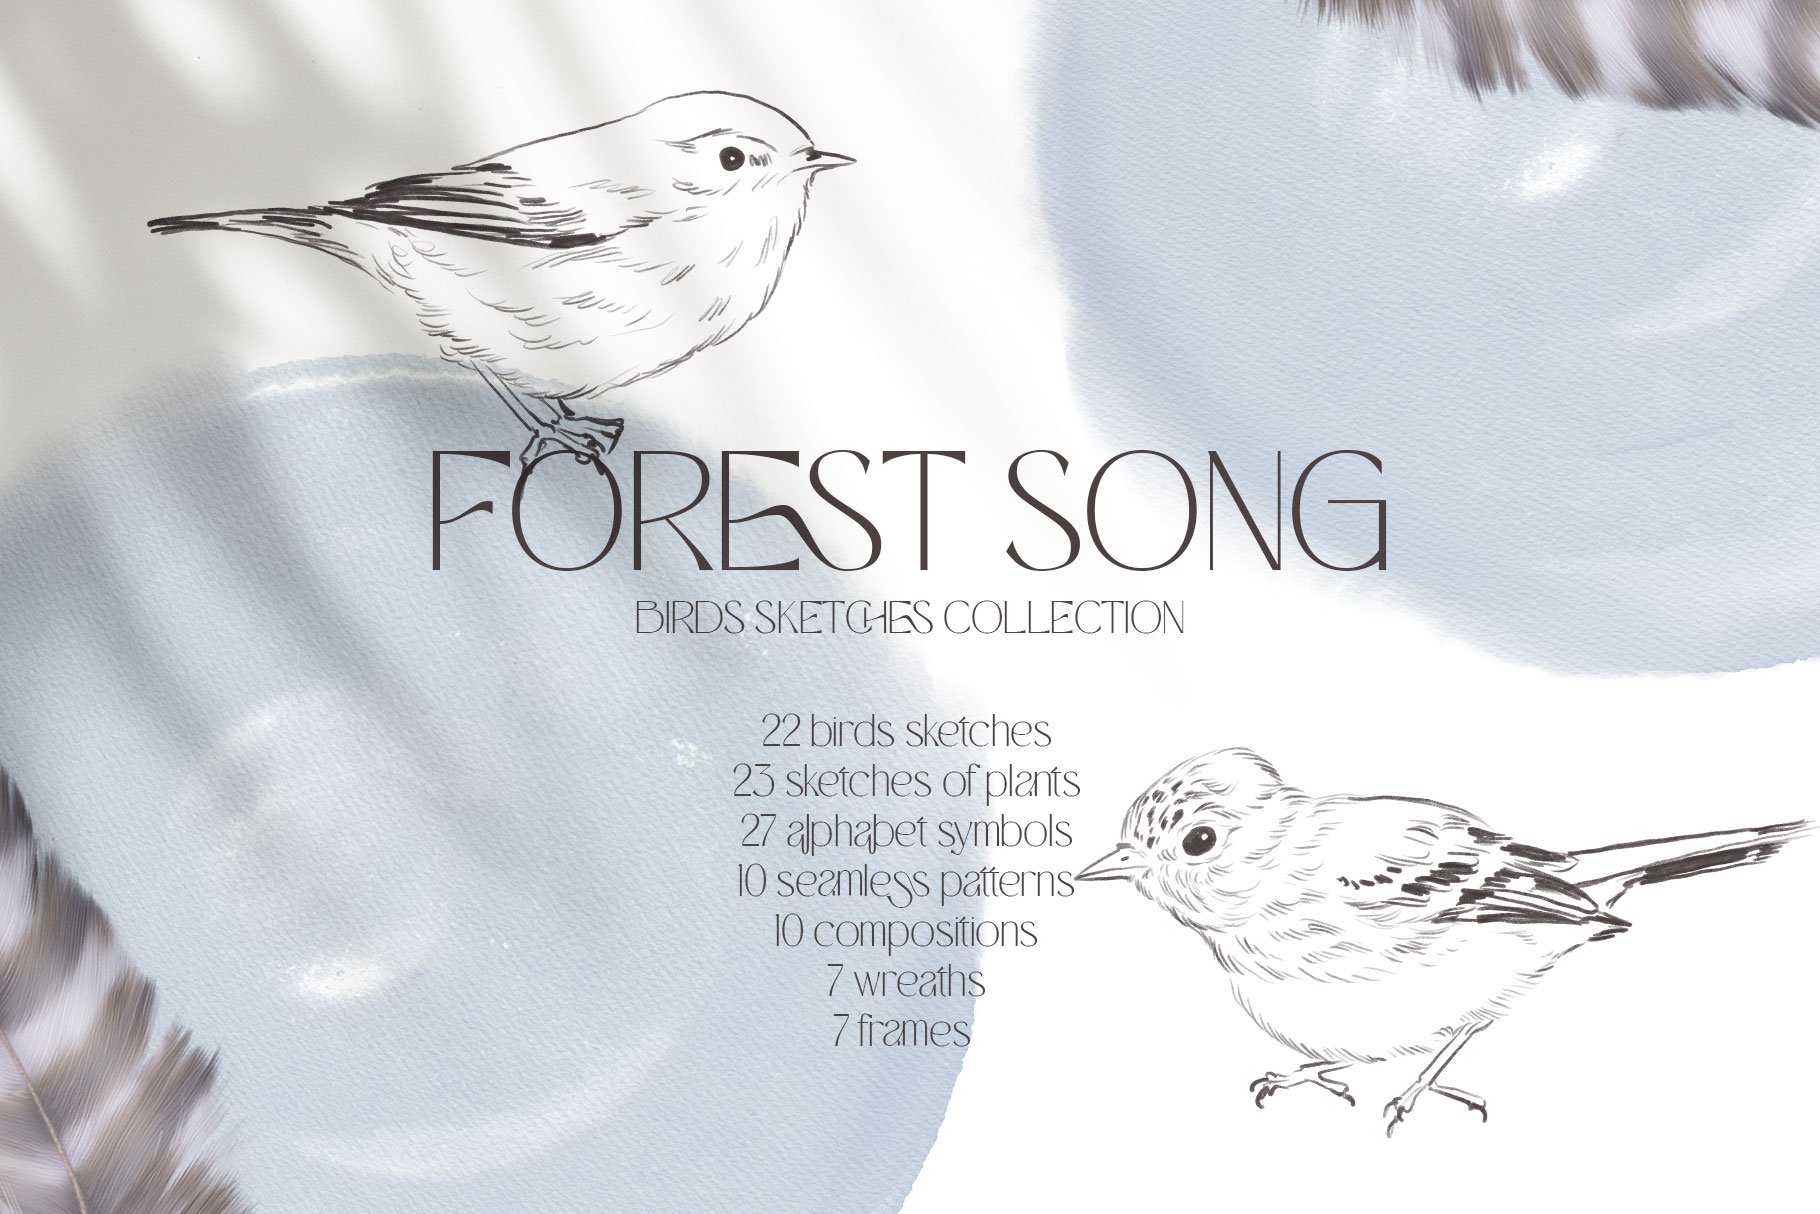 FOREST SONG birds sketches cover image.